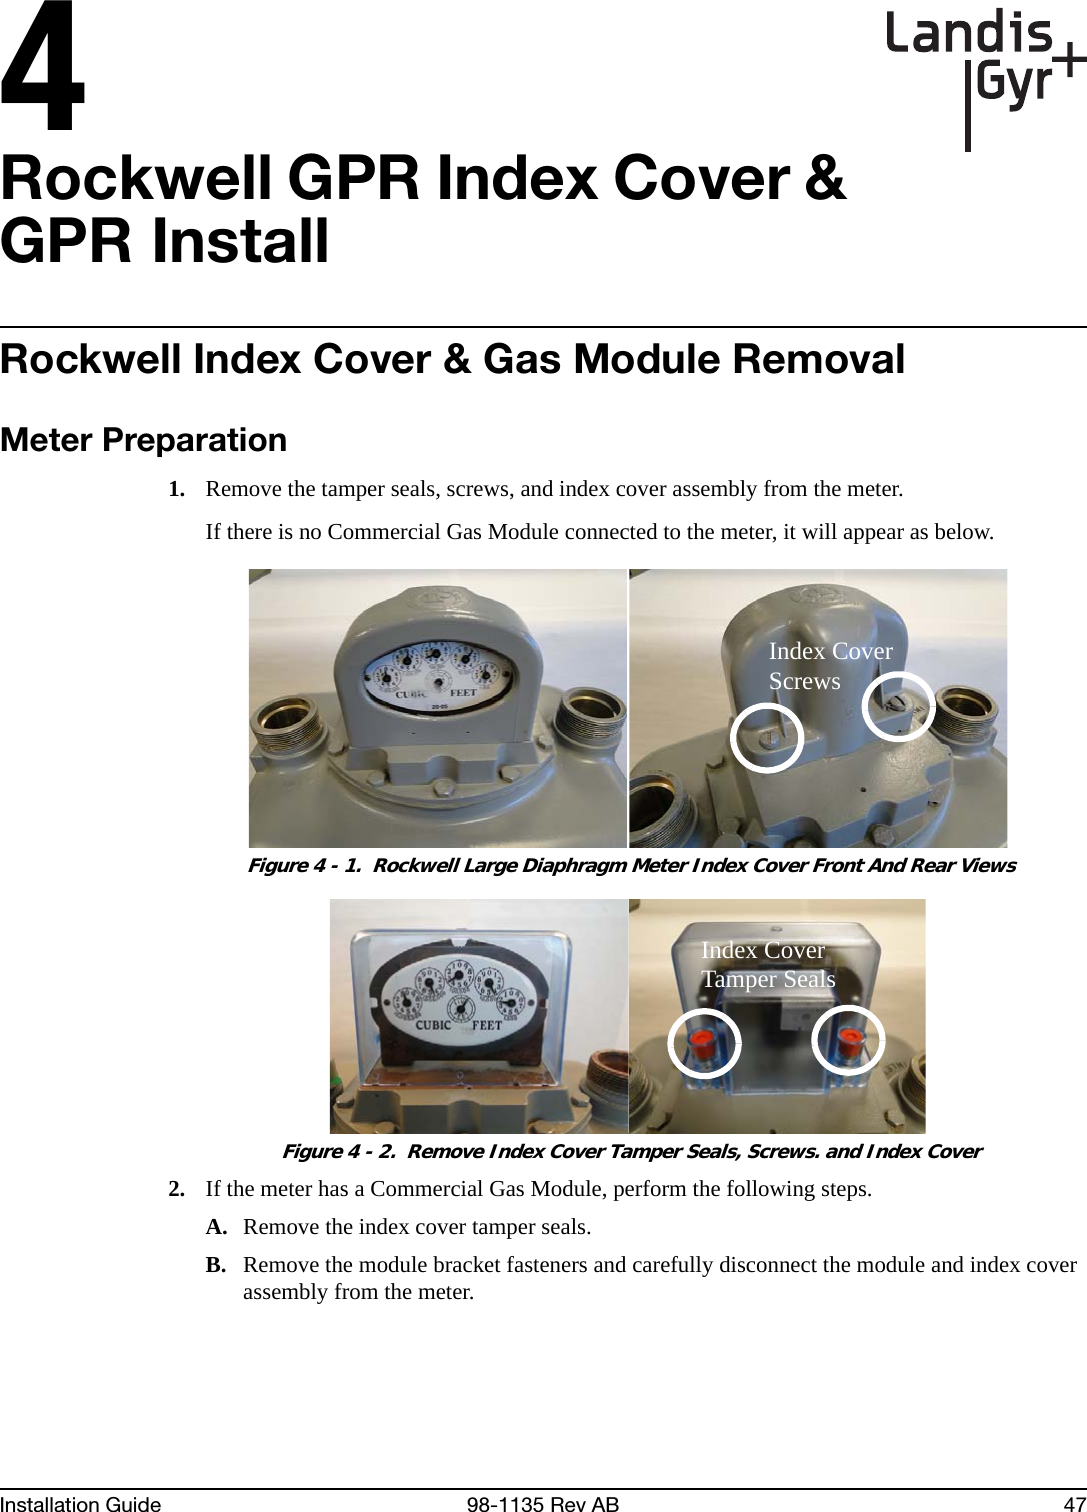 4Installation Guide 98-1135 Rev AB 47Rockwell GPR Index Cover &amp; GPR InstallRockwell Index Cover &amp; Gas Module RemovalMeter Preparation1. Remove the tamper seals, screws, and index cover assembly from the meter.If there is no Commercial Gas Module connected to the meter, it will appear as below. Figure 4 - 1.  Rockwell Large Diaphragm Meter Index Cover Front And Rear Views Figure 4 - 2.  Remove Index Cover Tamper Seals, Screws. and Index Cover2. If the meter has a Commercial Gas Module, perform the following steps.A. Remove the index cover tamper seals.B. Remove the module bracket fasteners and carefully disconnect the module and index cover assembly from the meter.Index Cover ScrewsIndex Cover Tamper Seals